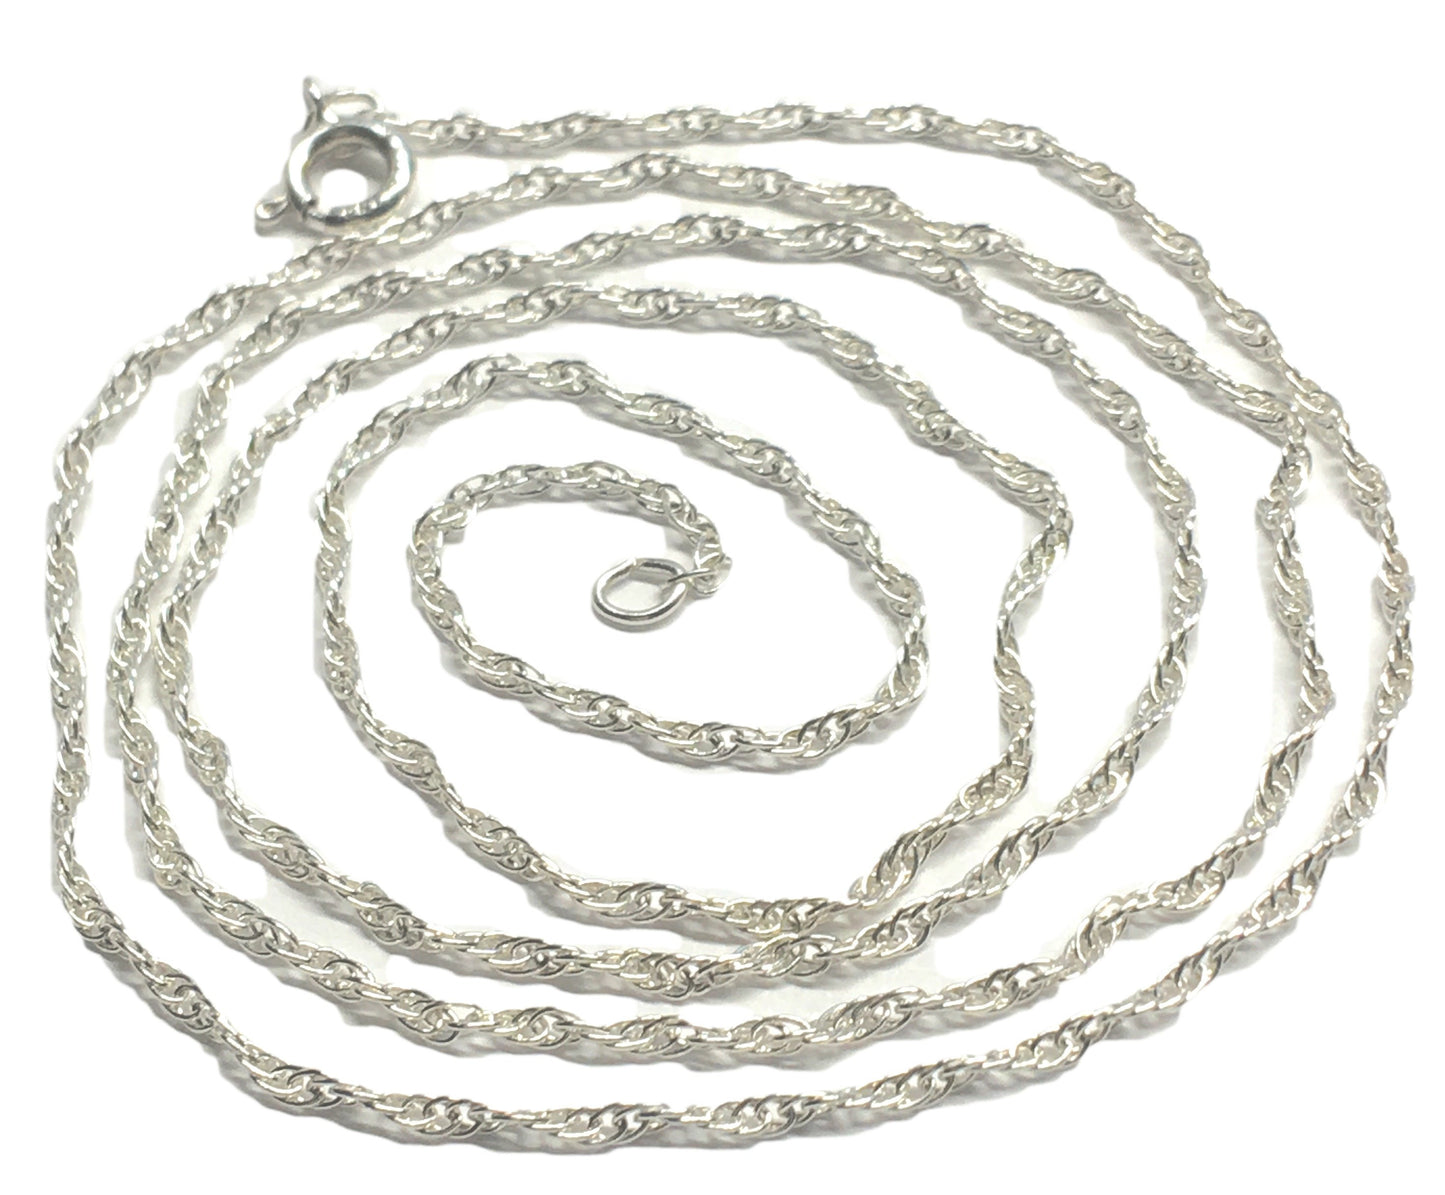 Womens Silver Necklaces | 24" Sterling 1.3mm Singapore Chain Necklace | Discount Overstock Jewelry website at Blingschlingers 